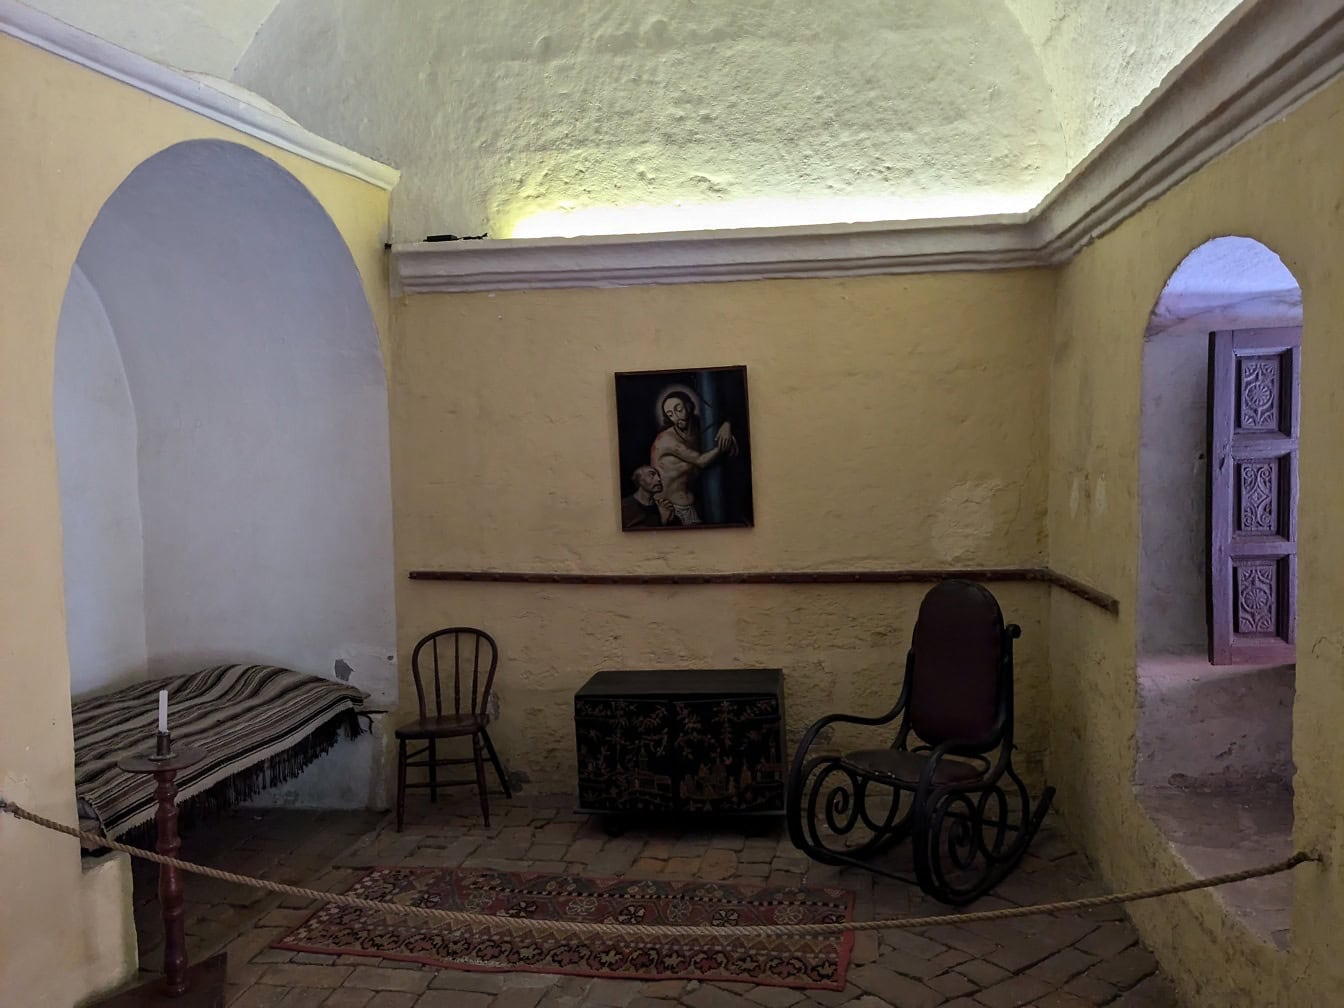 Room with an antique bed and swing-chair in Catalina De Siena museum in Peru, a UNESCO world heritage site